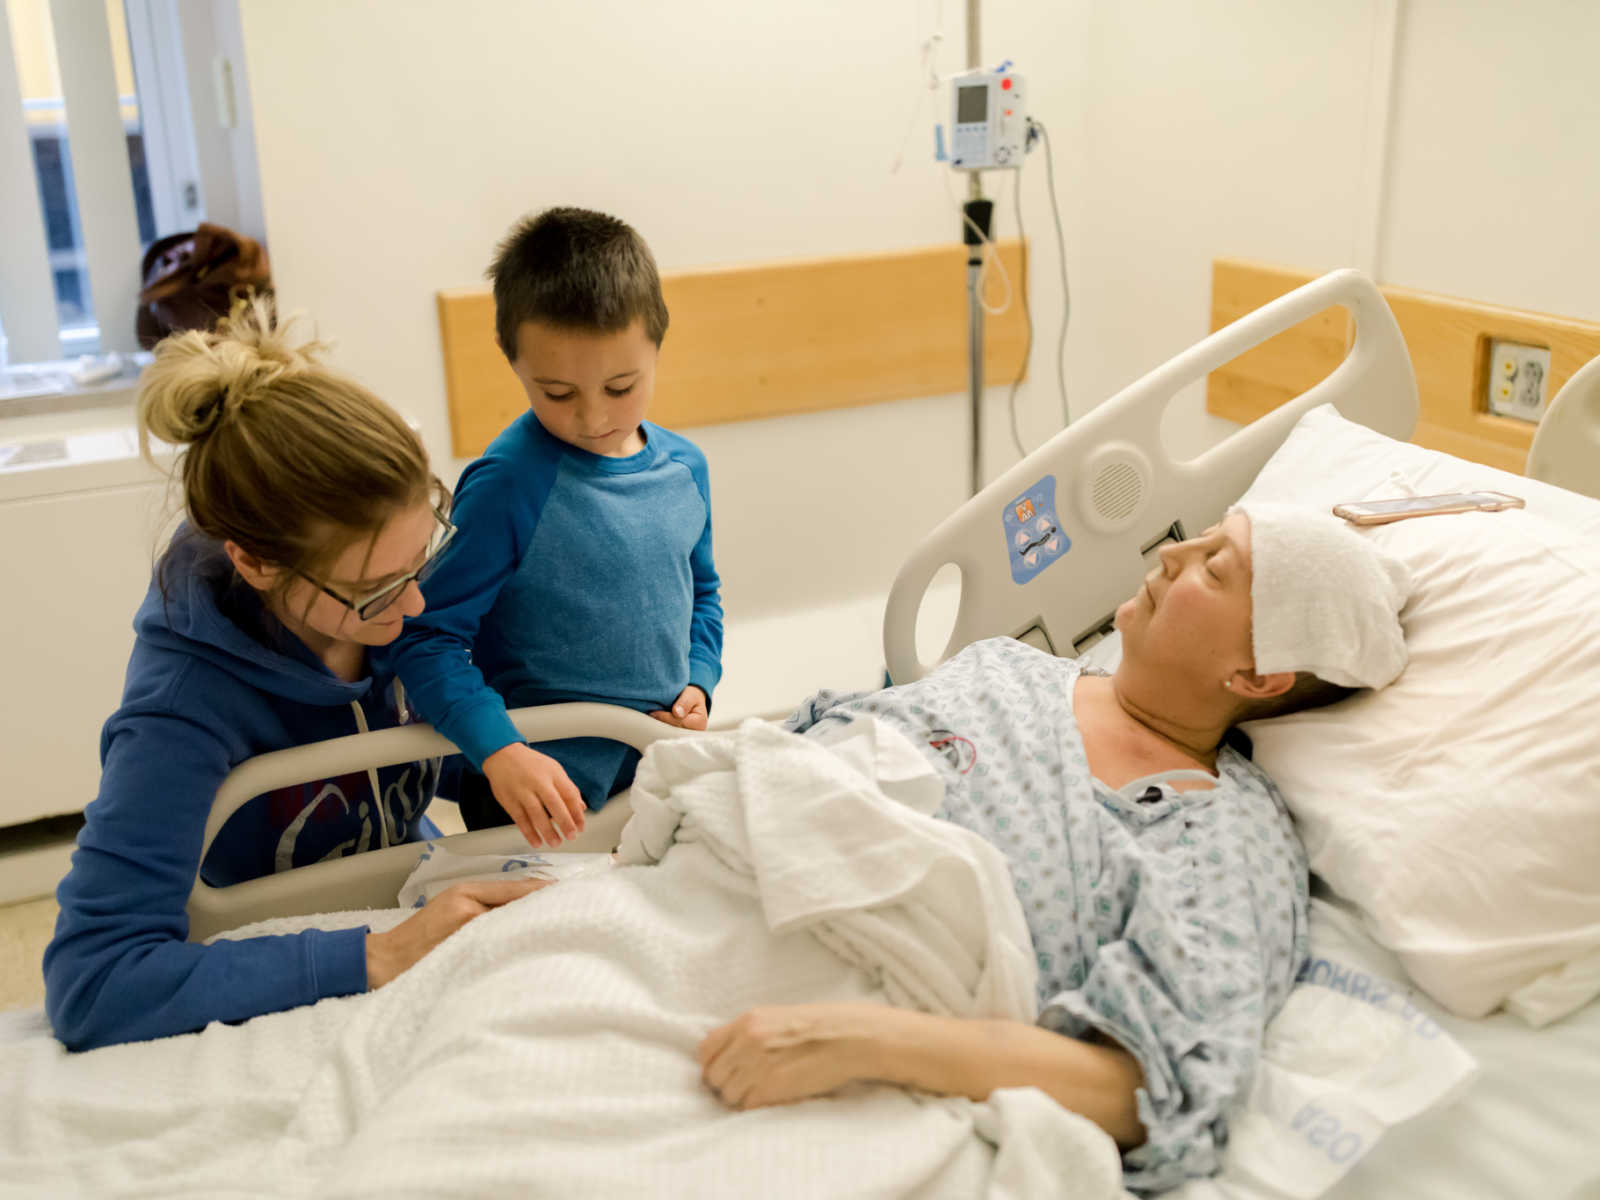 Non-hodgkin's lymphoma patient lies in hospital bed while sister and little boy watch over her